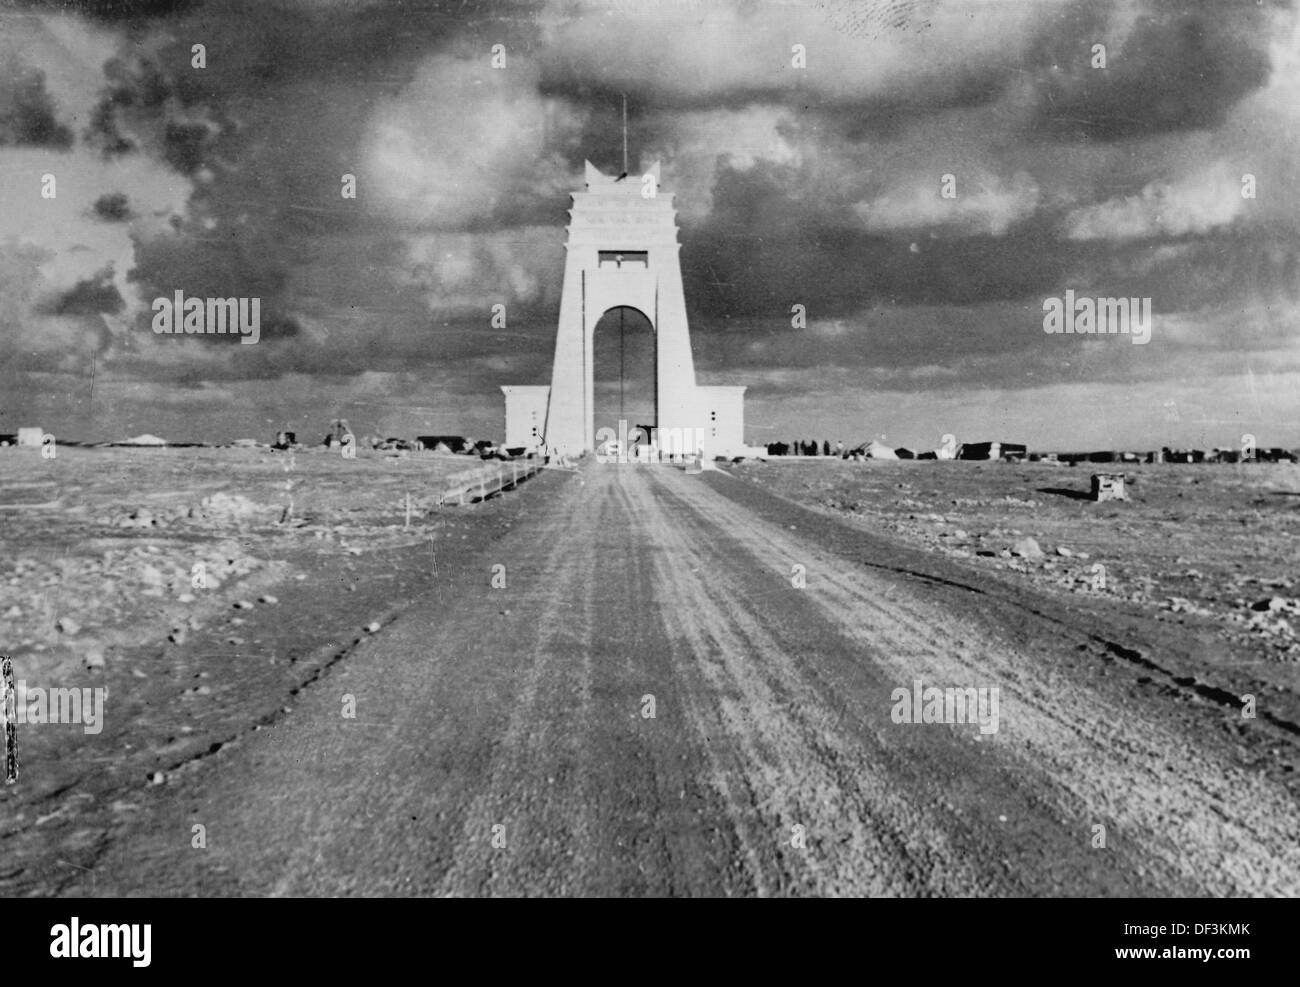 The image from the Nazi Propaganda! gives a view of the coastal highway Via Balbia through the Marble Arch Arco dei Fileni (the 'Gate of the Desert') in Italian Libya, published 23 September 1940. The triumph arch was built by the Italian colonialists, opened in 1937, and was demolished by the revolutionary troops of Muammar Gaddafi in 1970. Fotoarchiv für Zeitgeschichte Stock Photo